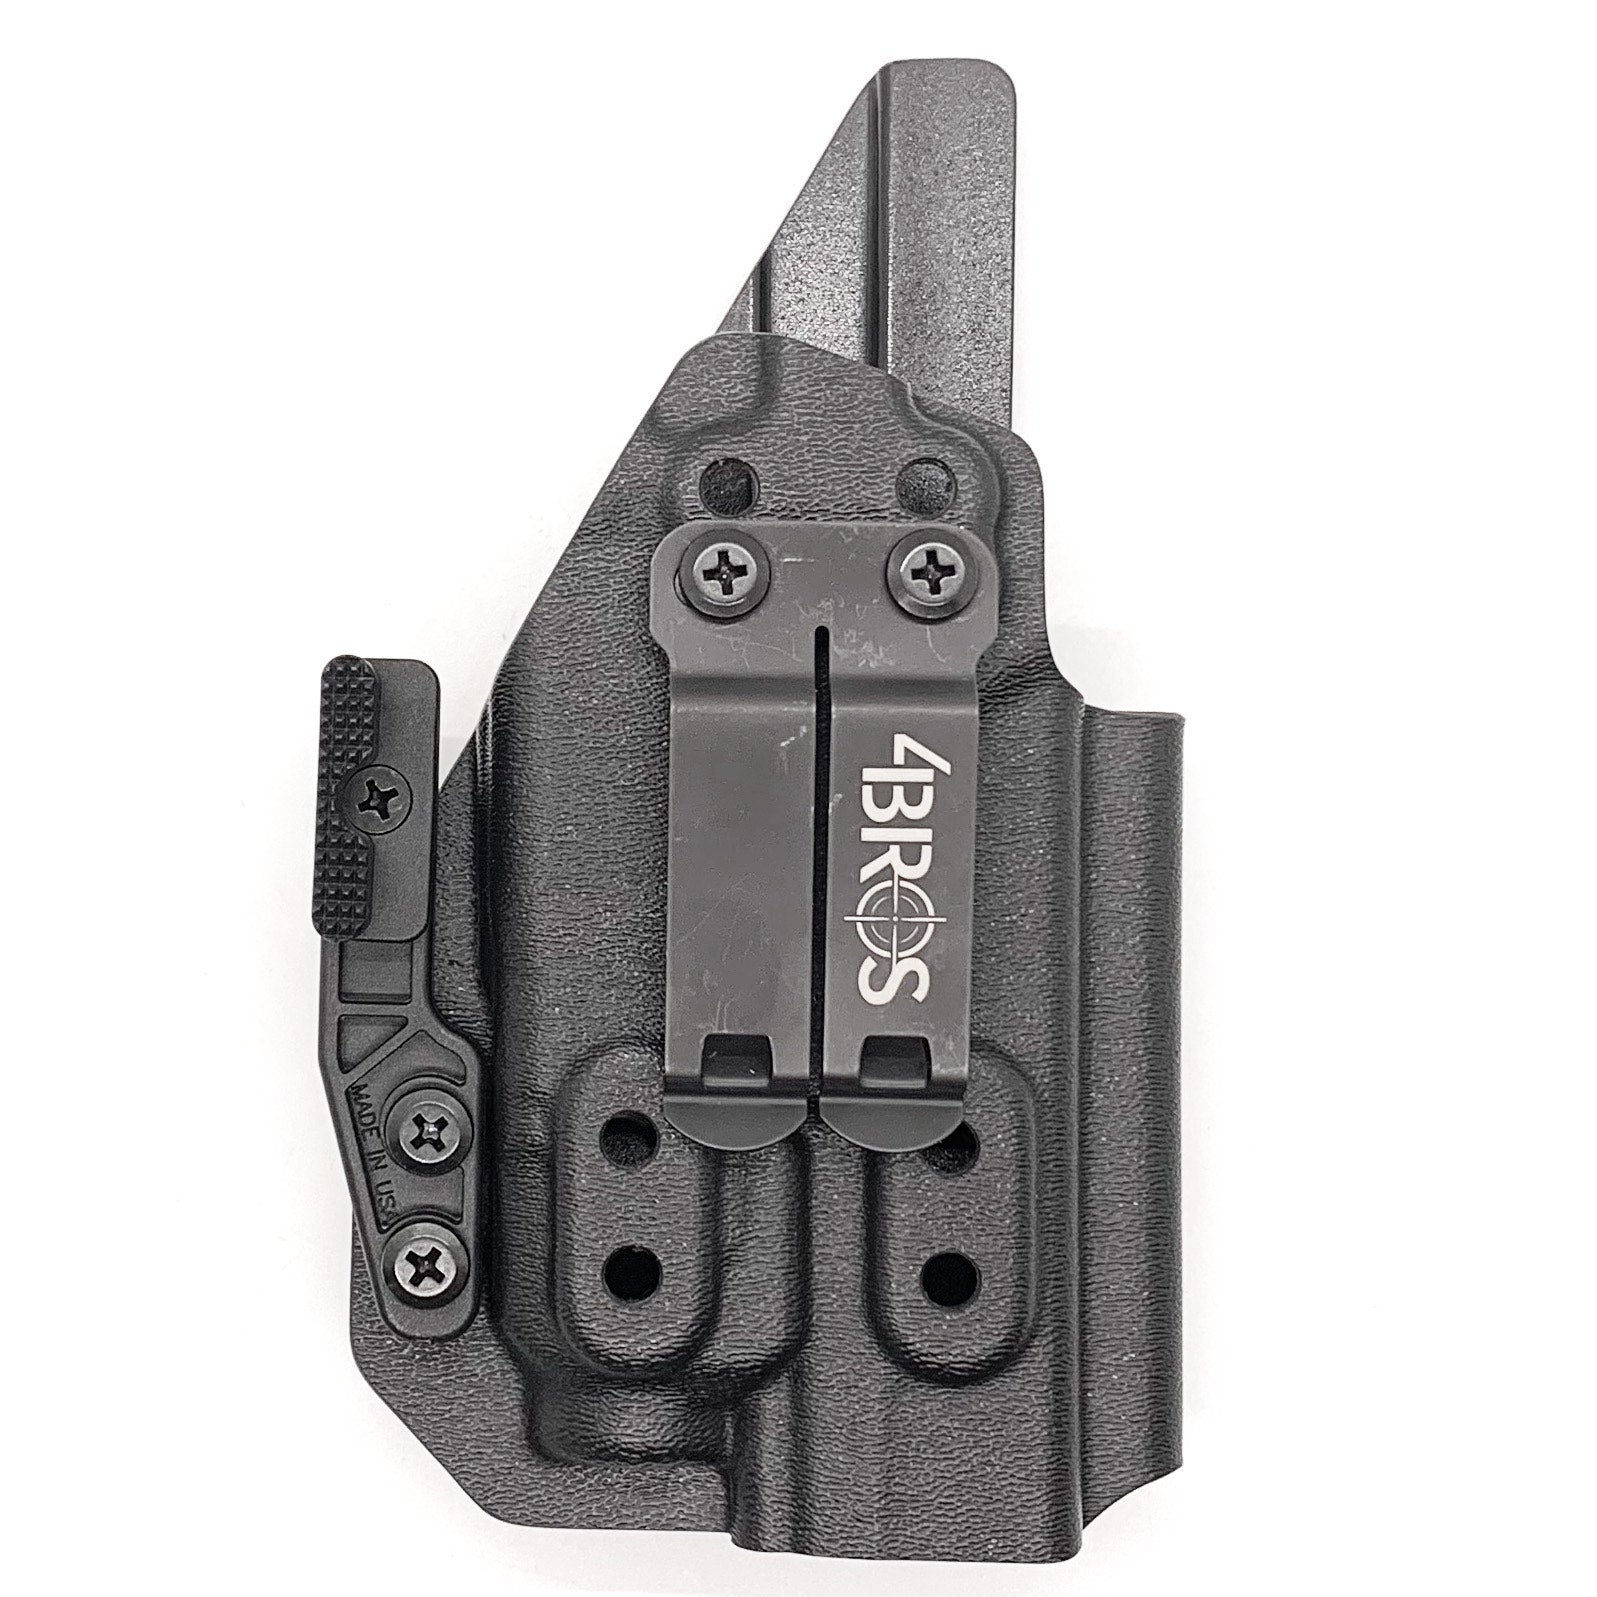 Inside Waistband IWB AIWB Appendix Kydex holster designed to fit the Glock 19, 23, 32, 19X, or 45 with the Streamlight TLR-7 or TLR-7A light. Adjustable retention, Open Muzzle, Cleared for red dot optics and suppressor height sight up to 3/8".  Proudly Made in the USA 